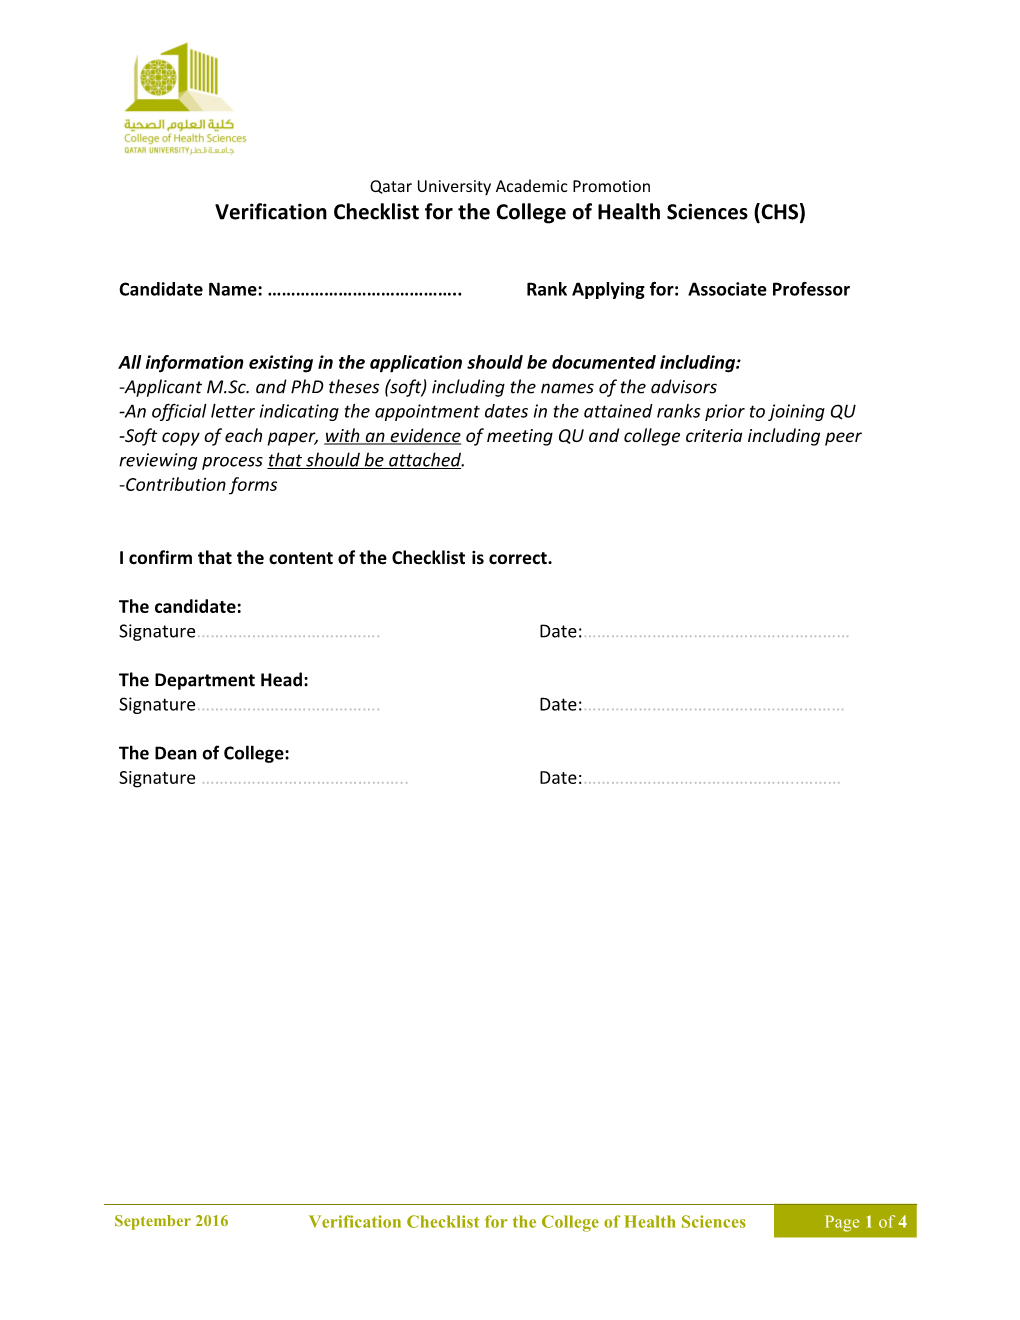 Verification Checklist for the College of Health Sciences (CHS)